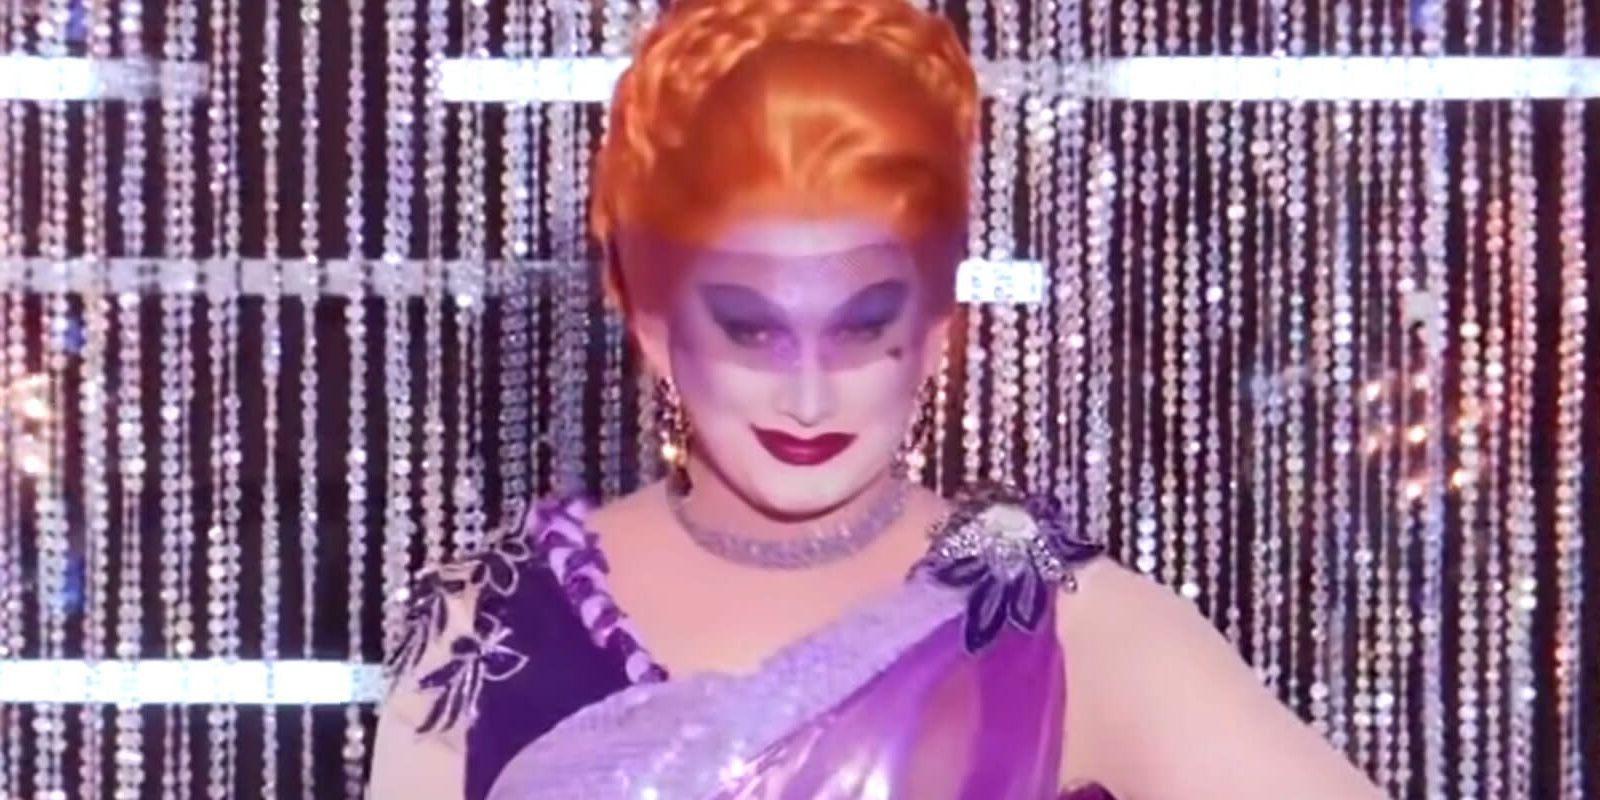 Cropped Jinkx Monsoon on the Main Stage in Purple Gown